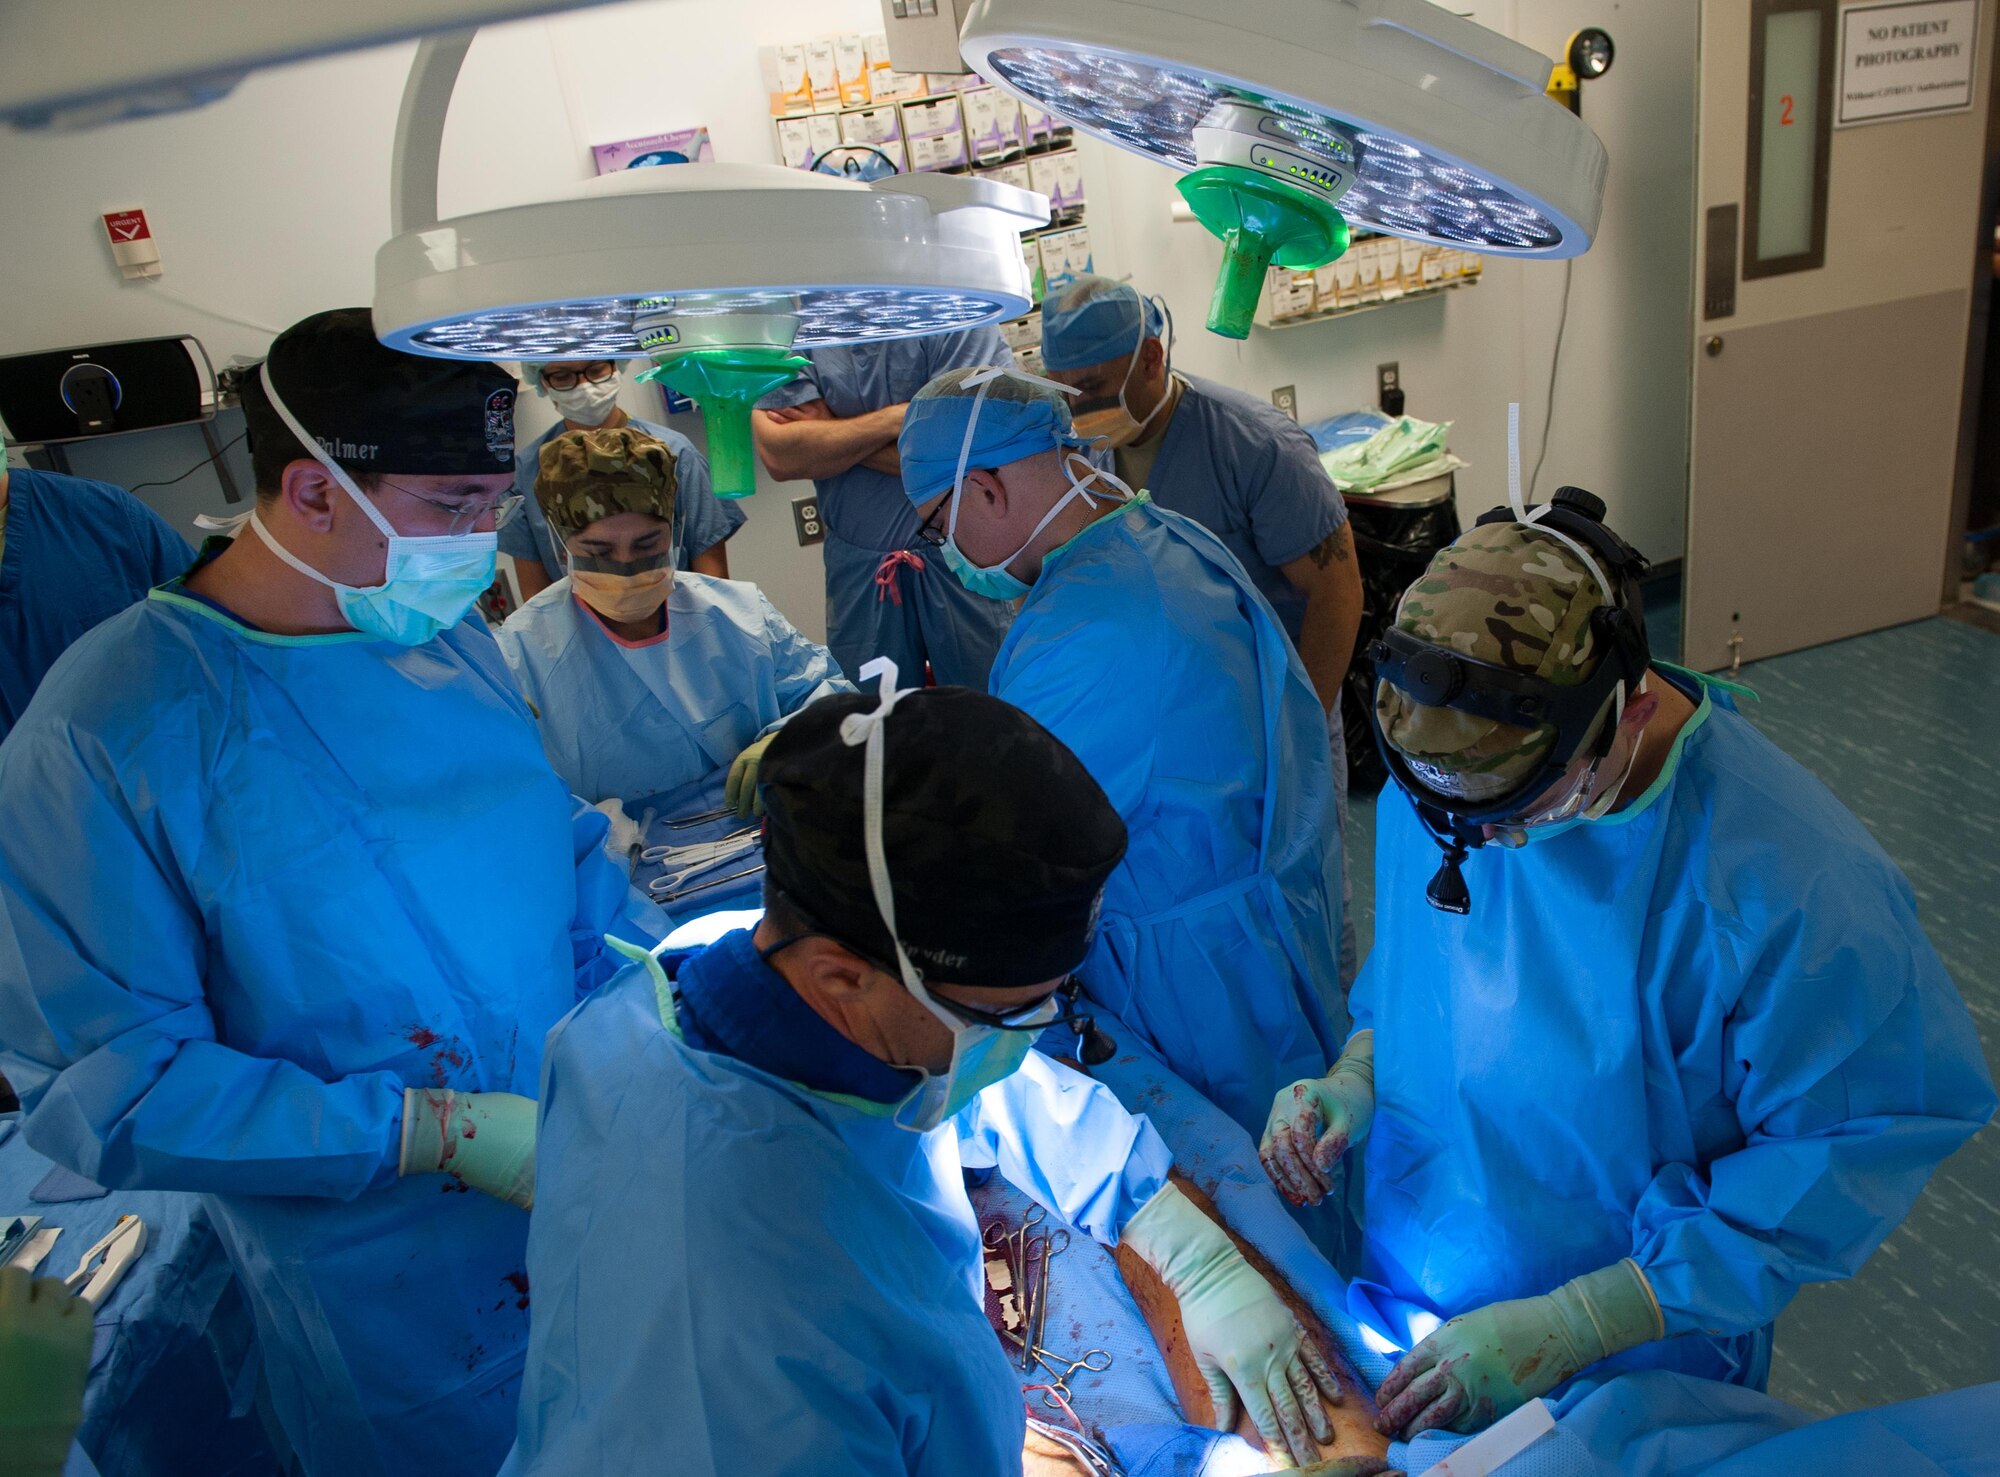 U.S. Airmen assigned to the 455th Expeditionary Medical Group perform surgery for gunshot trauma on an Afghan National Defense and Security Forces soldier at the Craig Joint Theater Hospital, Bagram Airfield Afghanistan, Sept. 26, 2015. The CJTH provides surgical capabilities in trauma, general surgery, orthopedics, neurosurgery, urology, vascular surgery and otolaryngology, all of which are critical to helping 98 percent of patients who come to the hospital survive their injuries. (U.S. Air Force photo by Tech. Sgt. Joseph Swafford/Released)